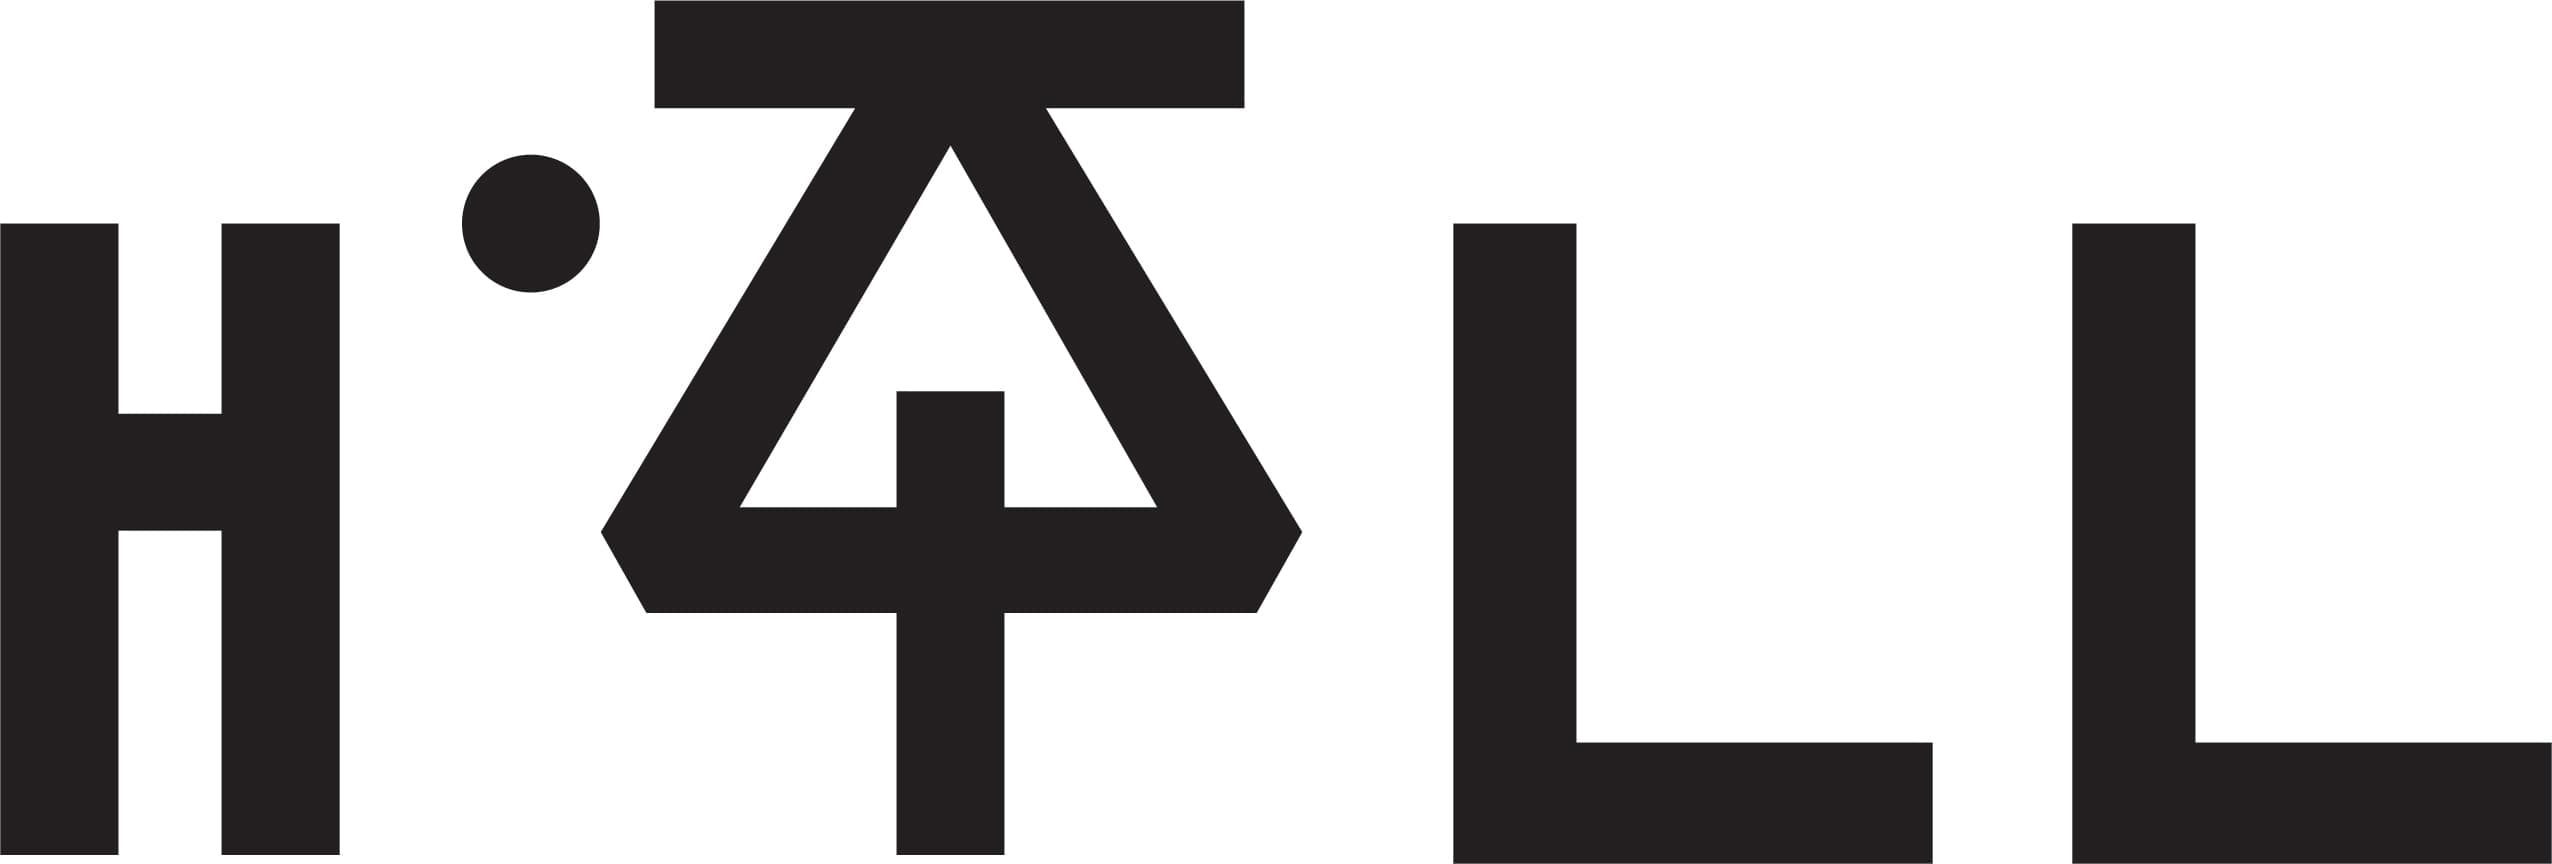 House of All logo